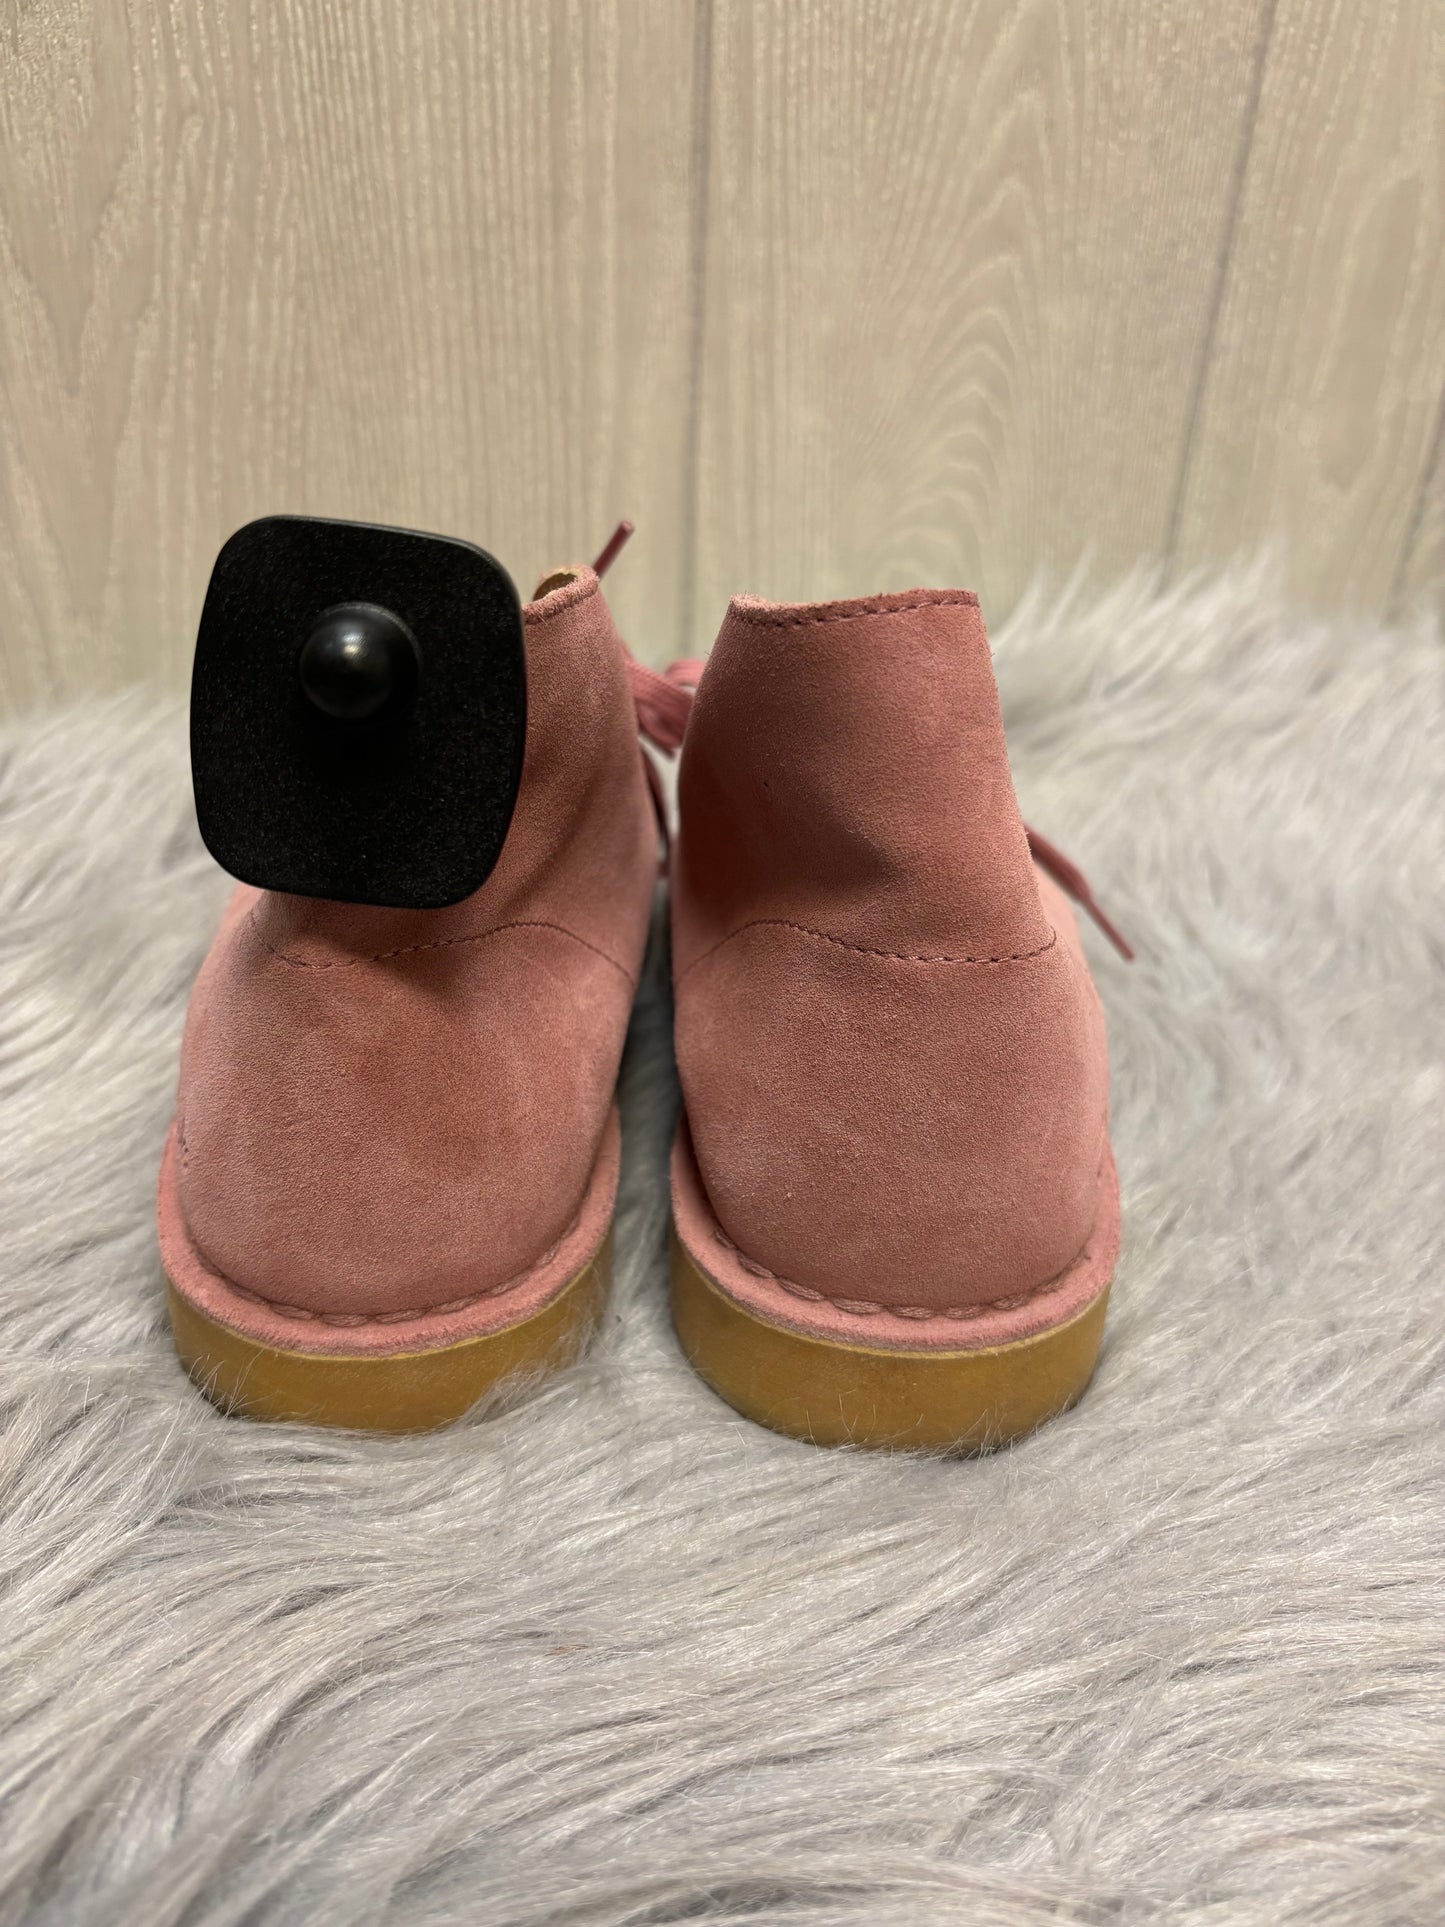 Pink Shoes Flats Clarks, Size 7.5